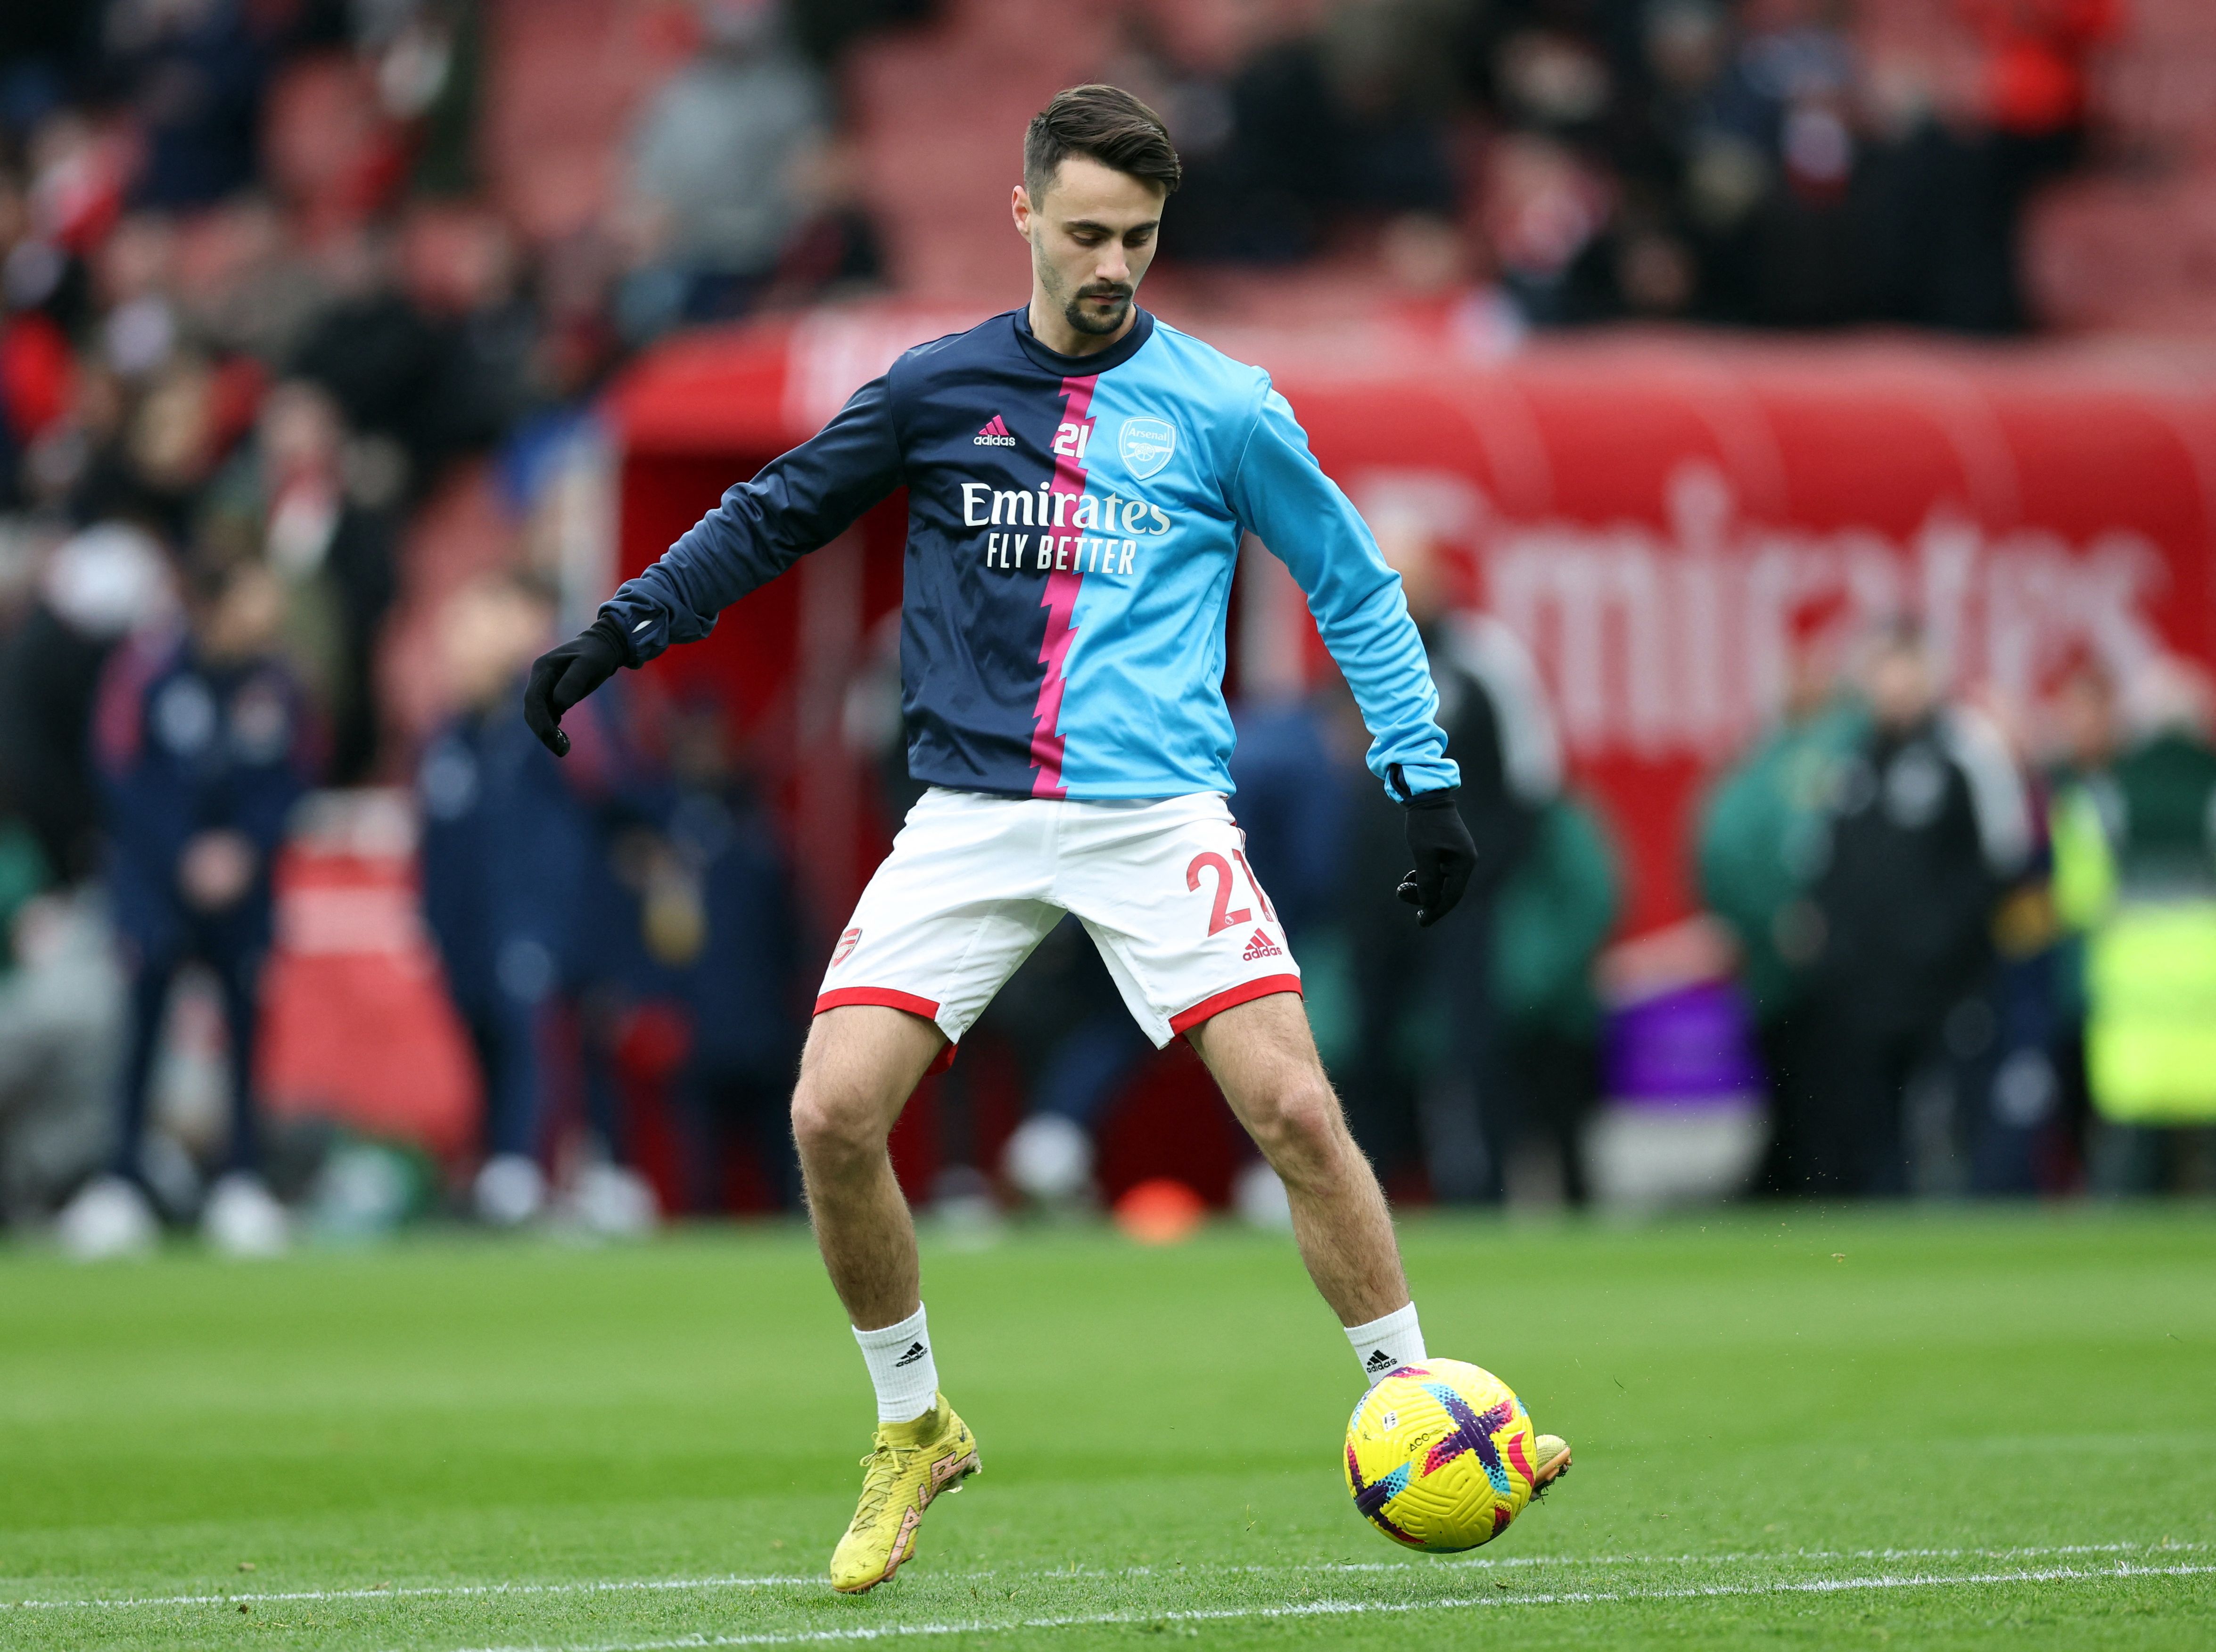 Arsenal's Fabio Vieira during the warm up before the match